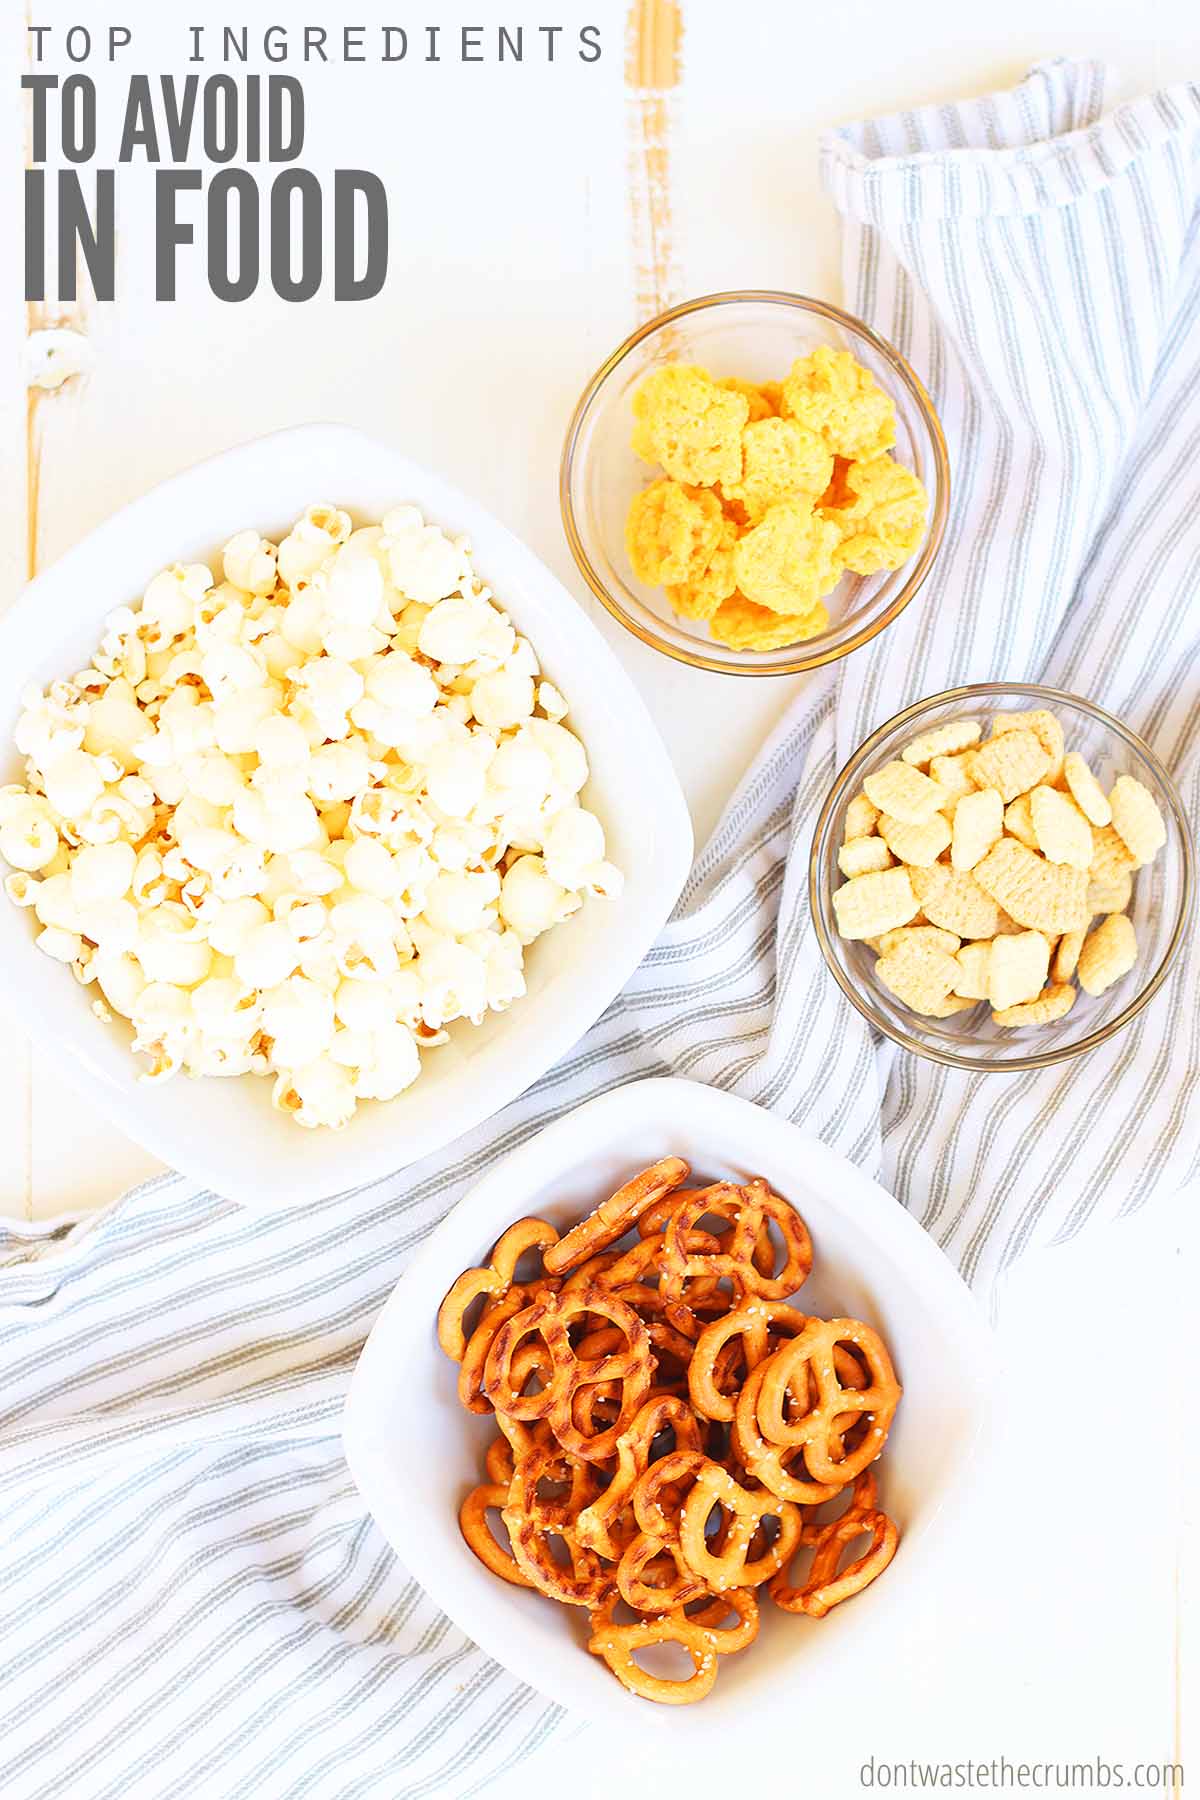 Bowl of popcorn, bowl of pretzels, bowl of chex cereal, and bowl of rice cakes. Learn more about food additives. Text overlay reads Top ingredients to avoid in food.